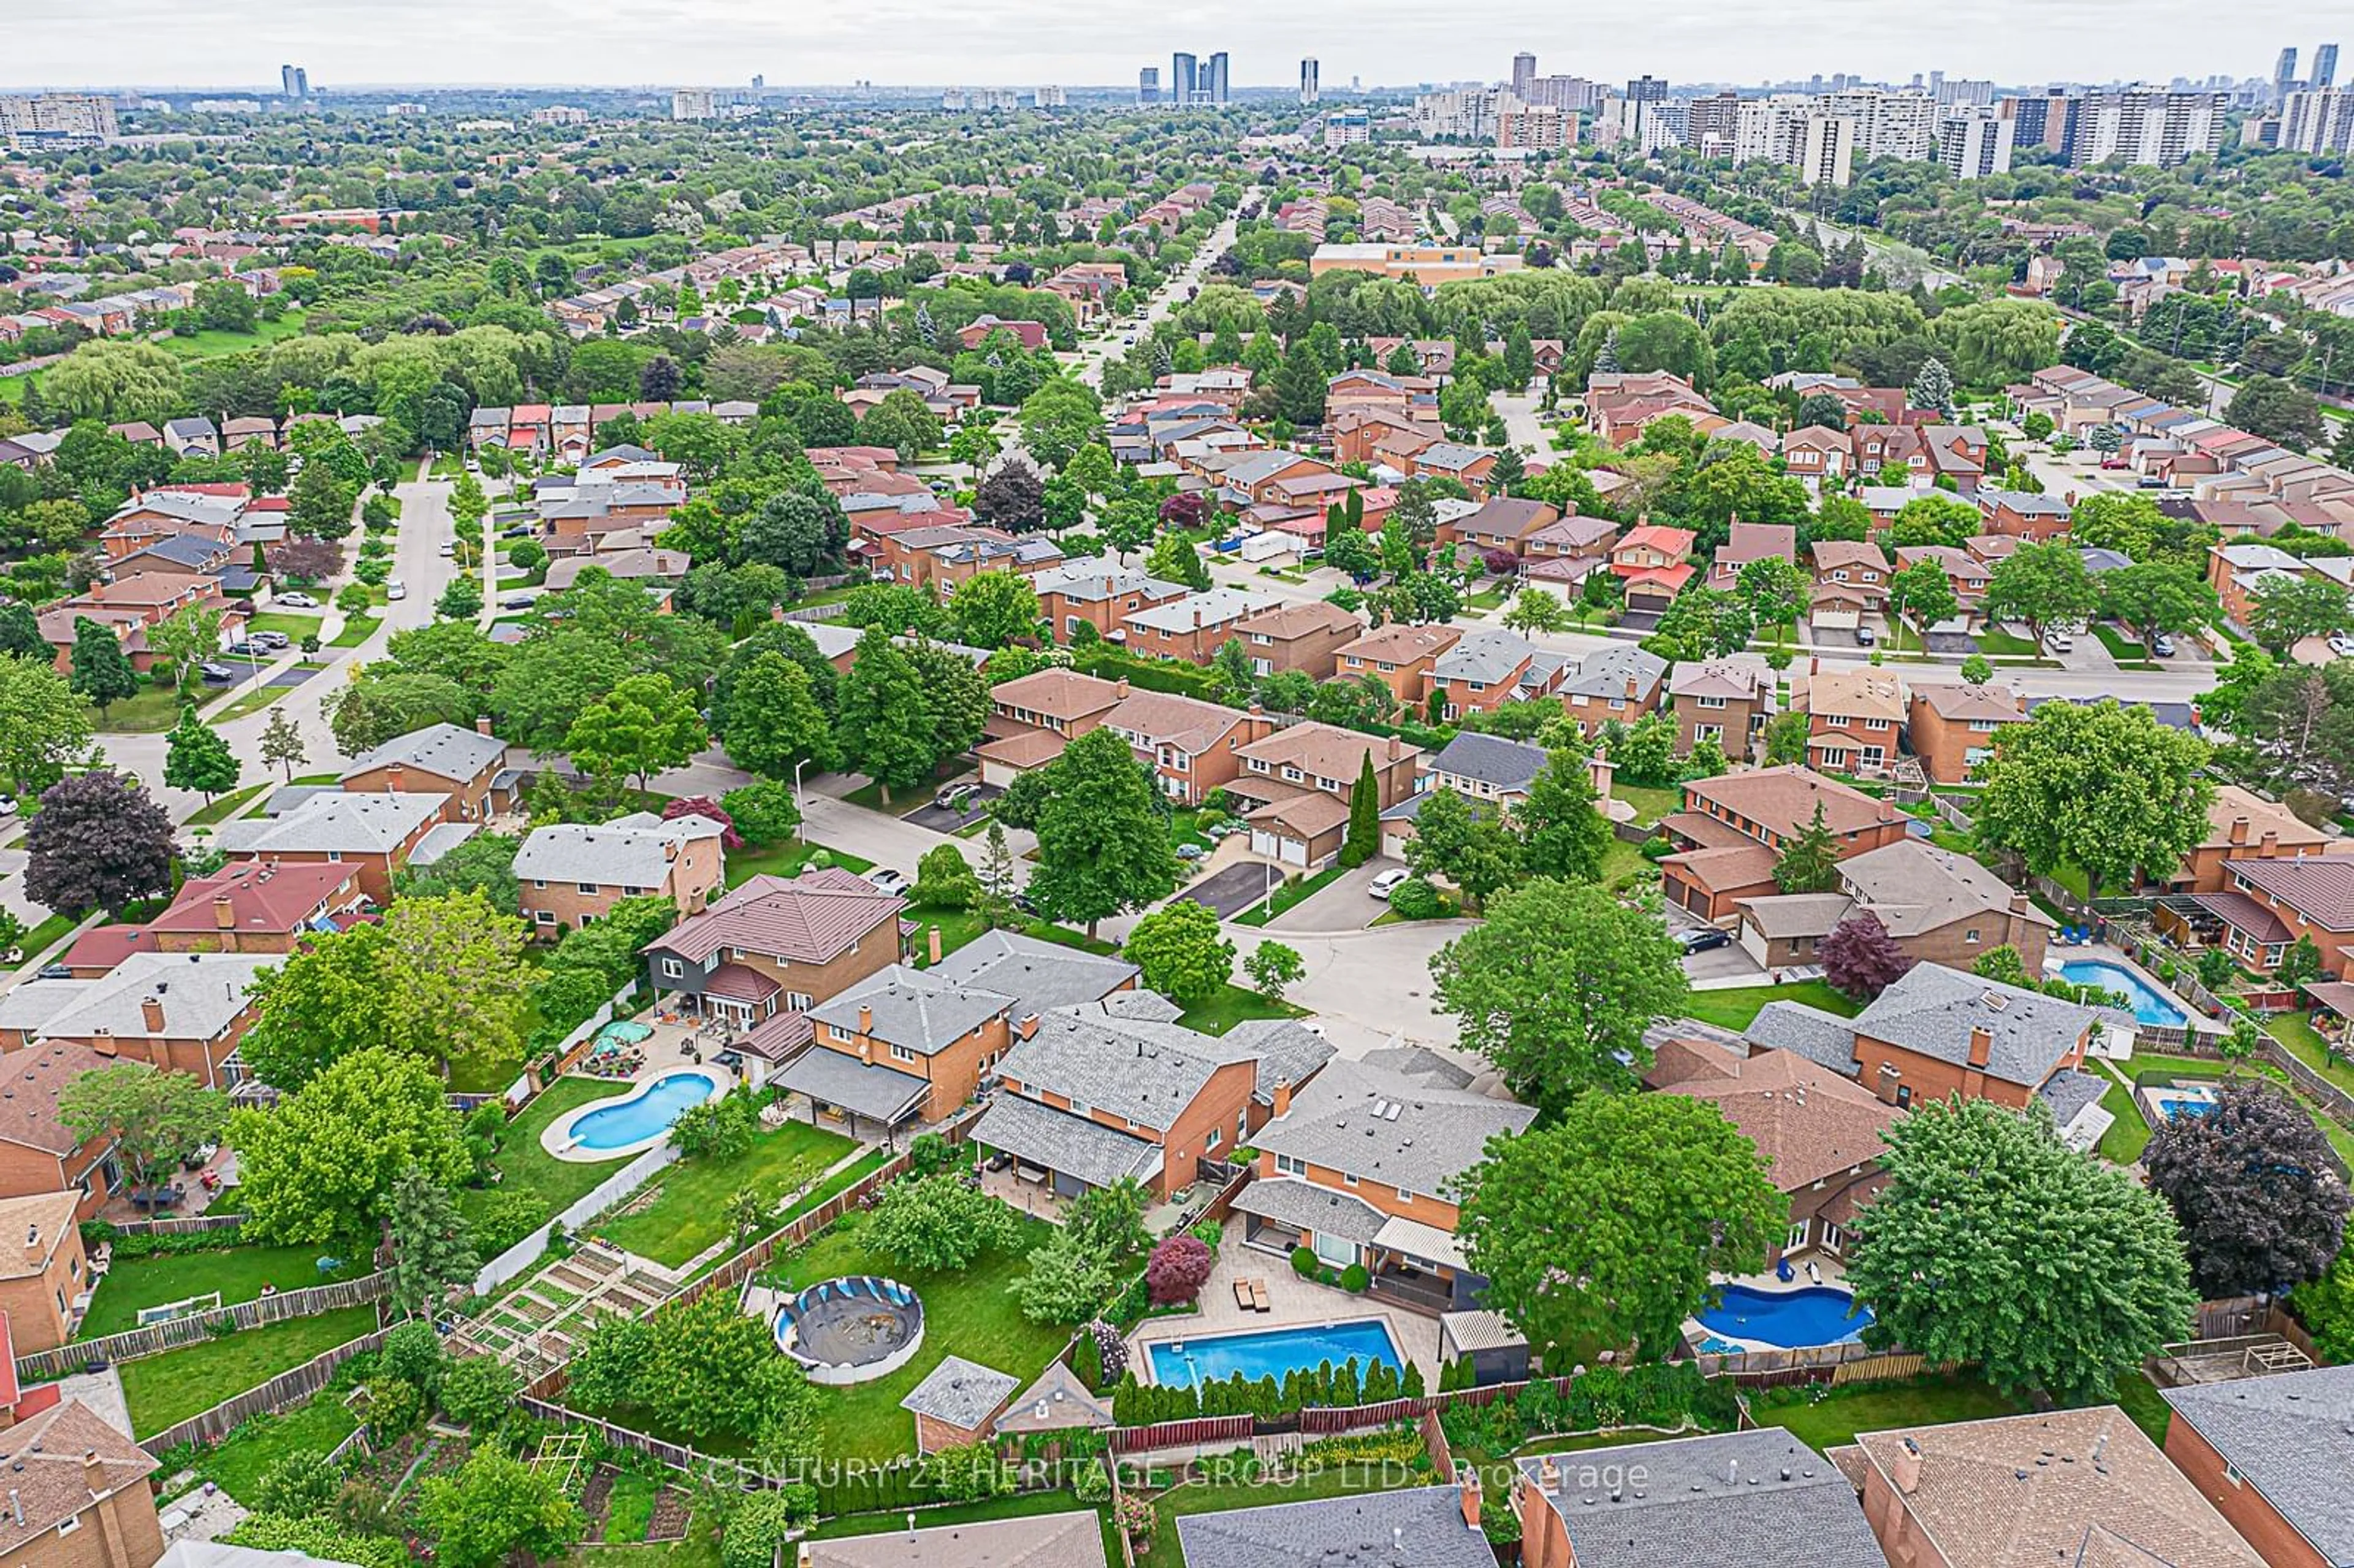 Lakeview for 39 Brack Pl, Vaughan Ontario L4J 2W3